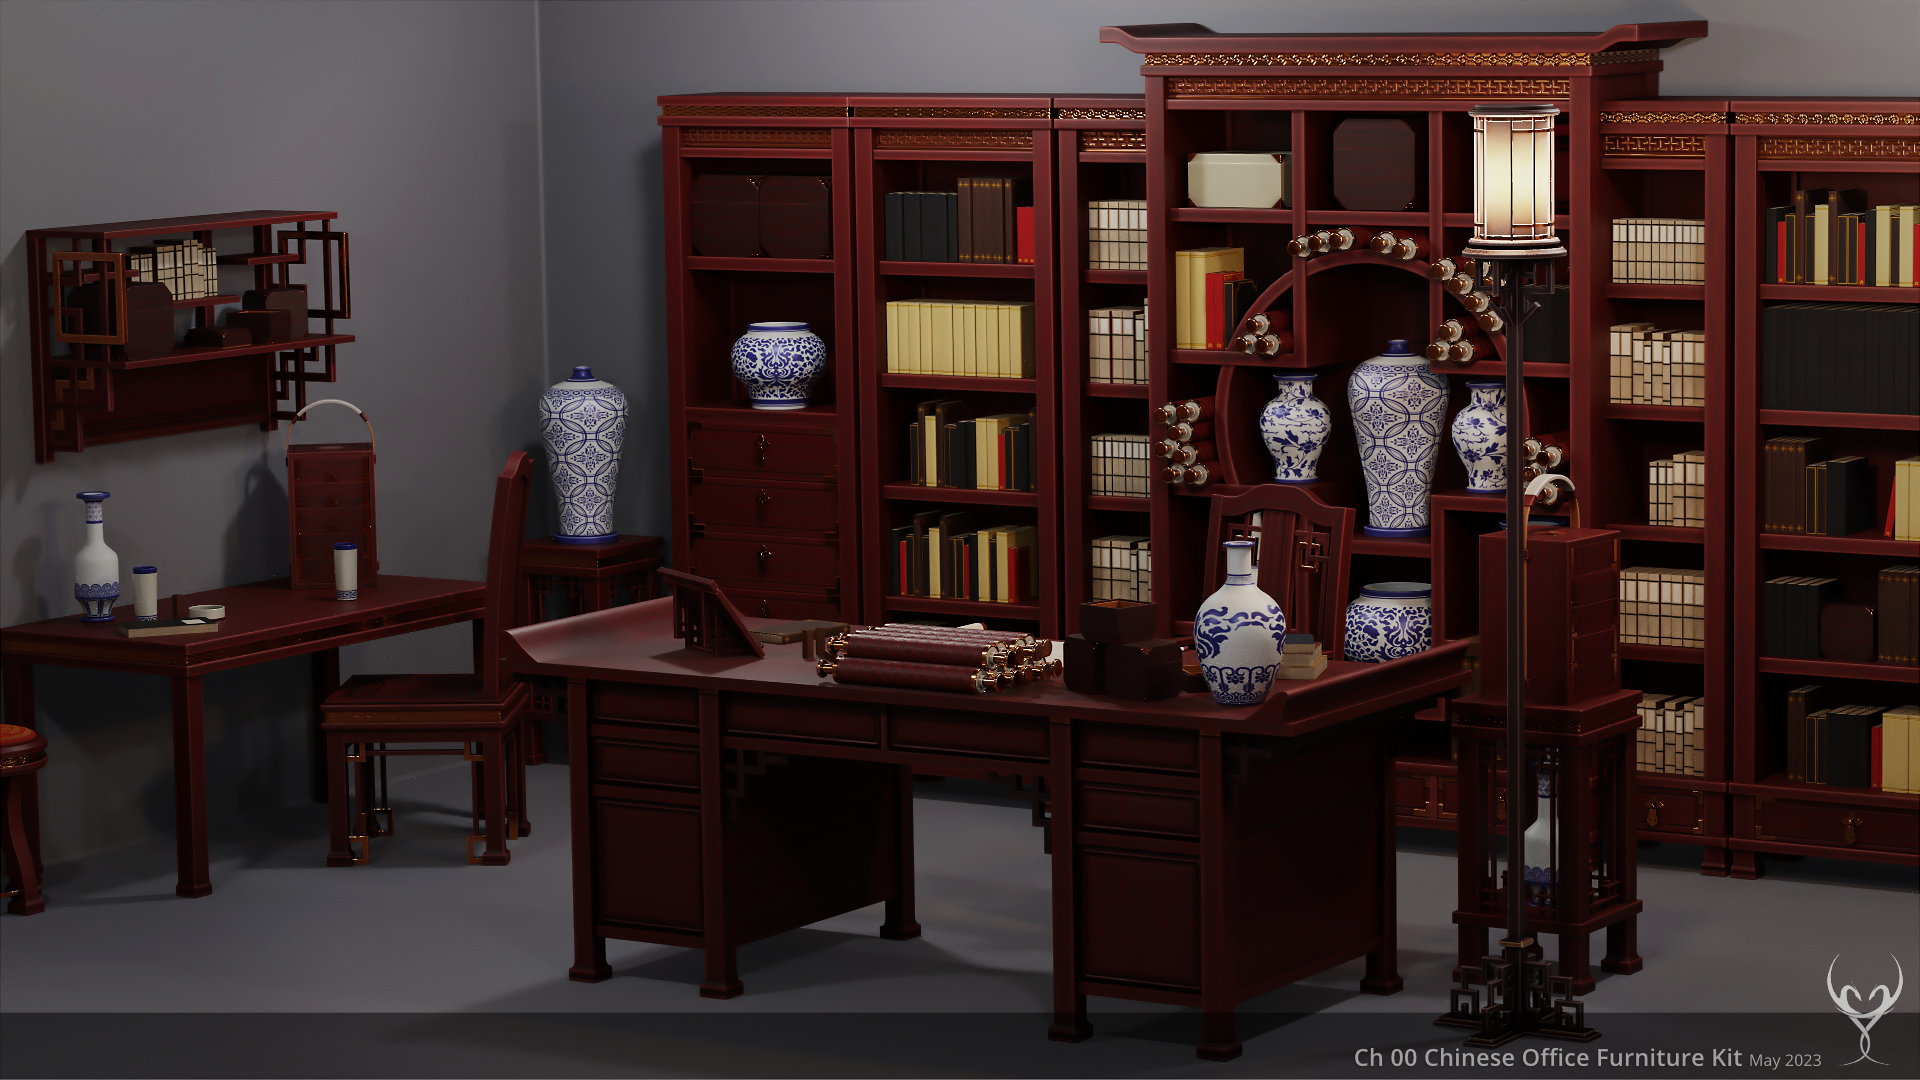 Ch 00 Chinese Office Furniture Kit